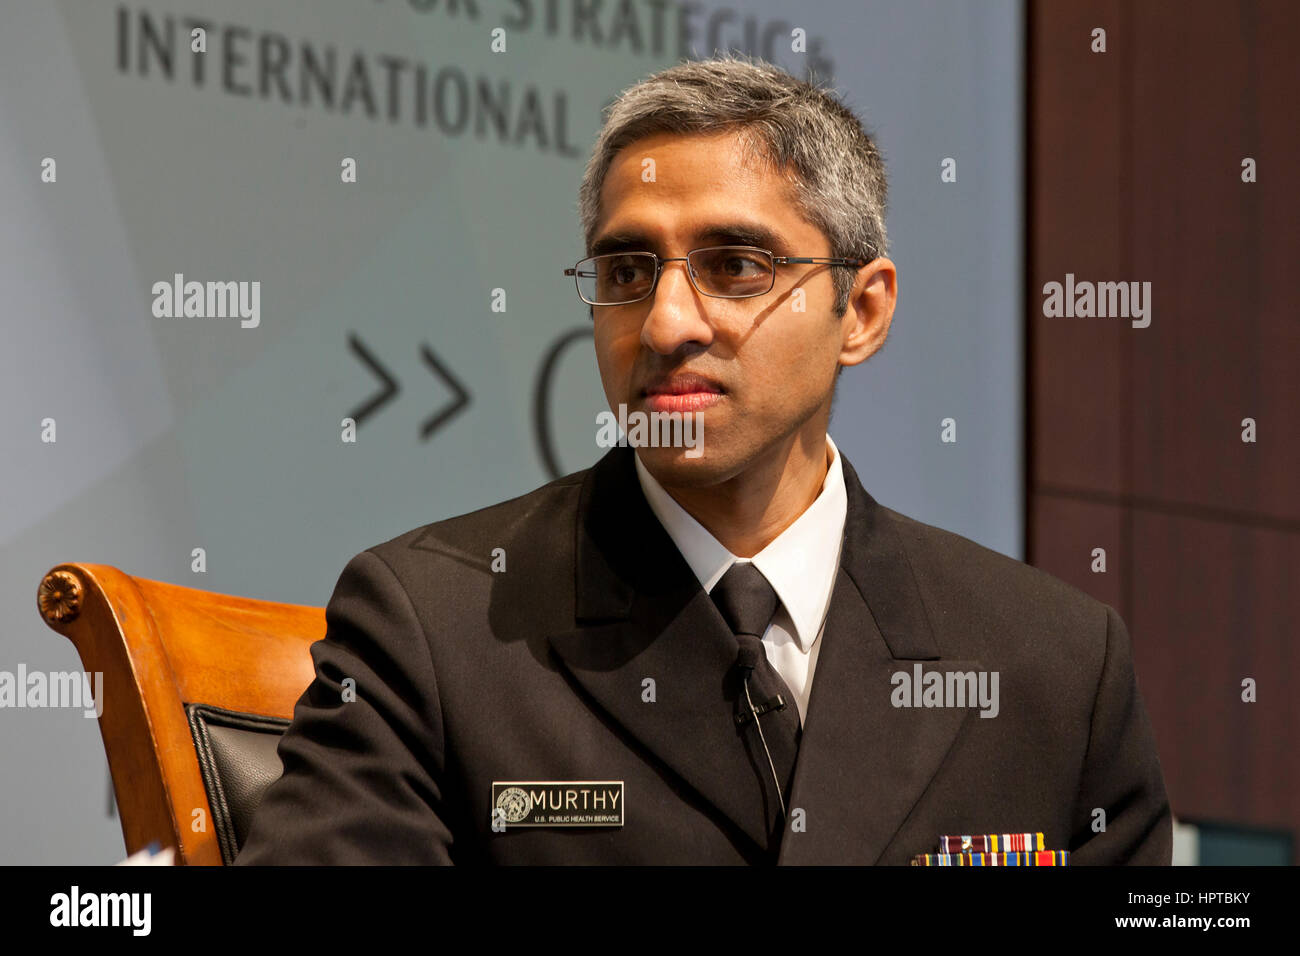 February 24, 2017, Washington, DC USA: US Surgeon General Dr. Vivek H. Murthy discusses current US medical issues, including the outbreak of prescription opioid epidemic. Stock Photo